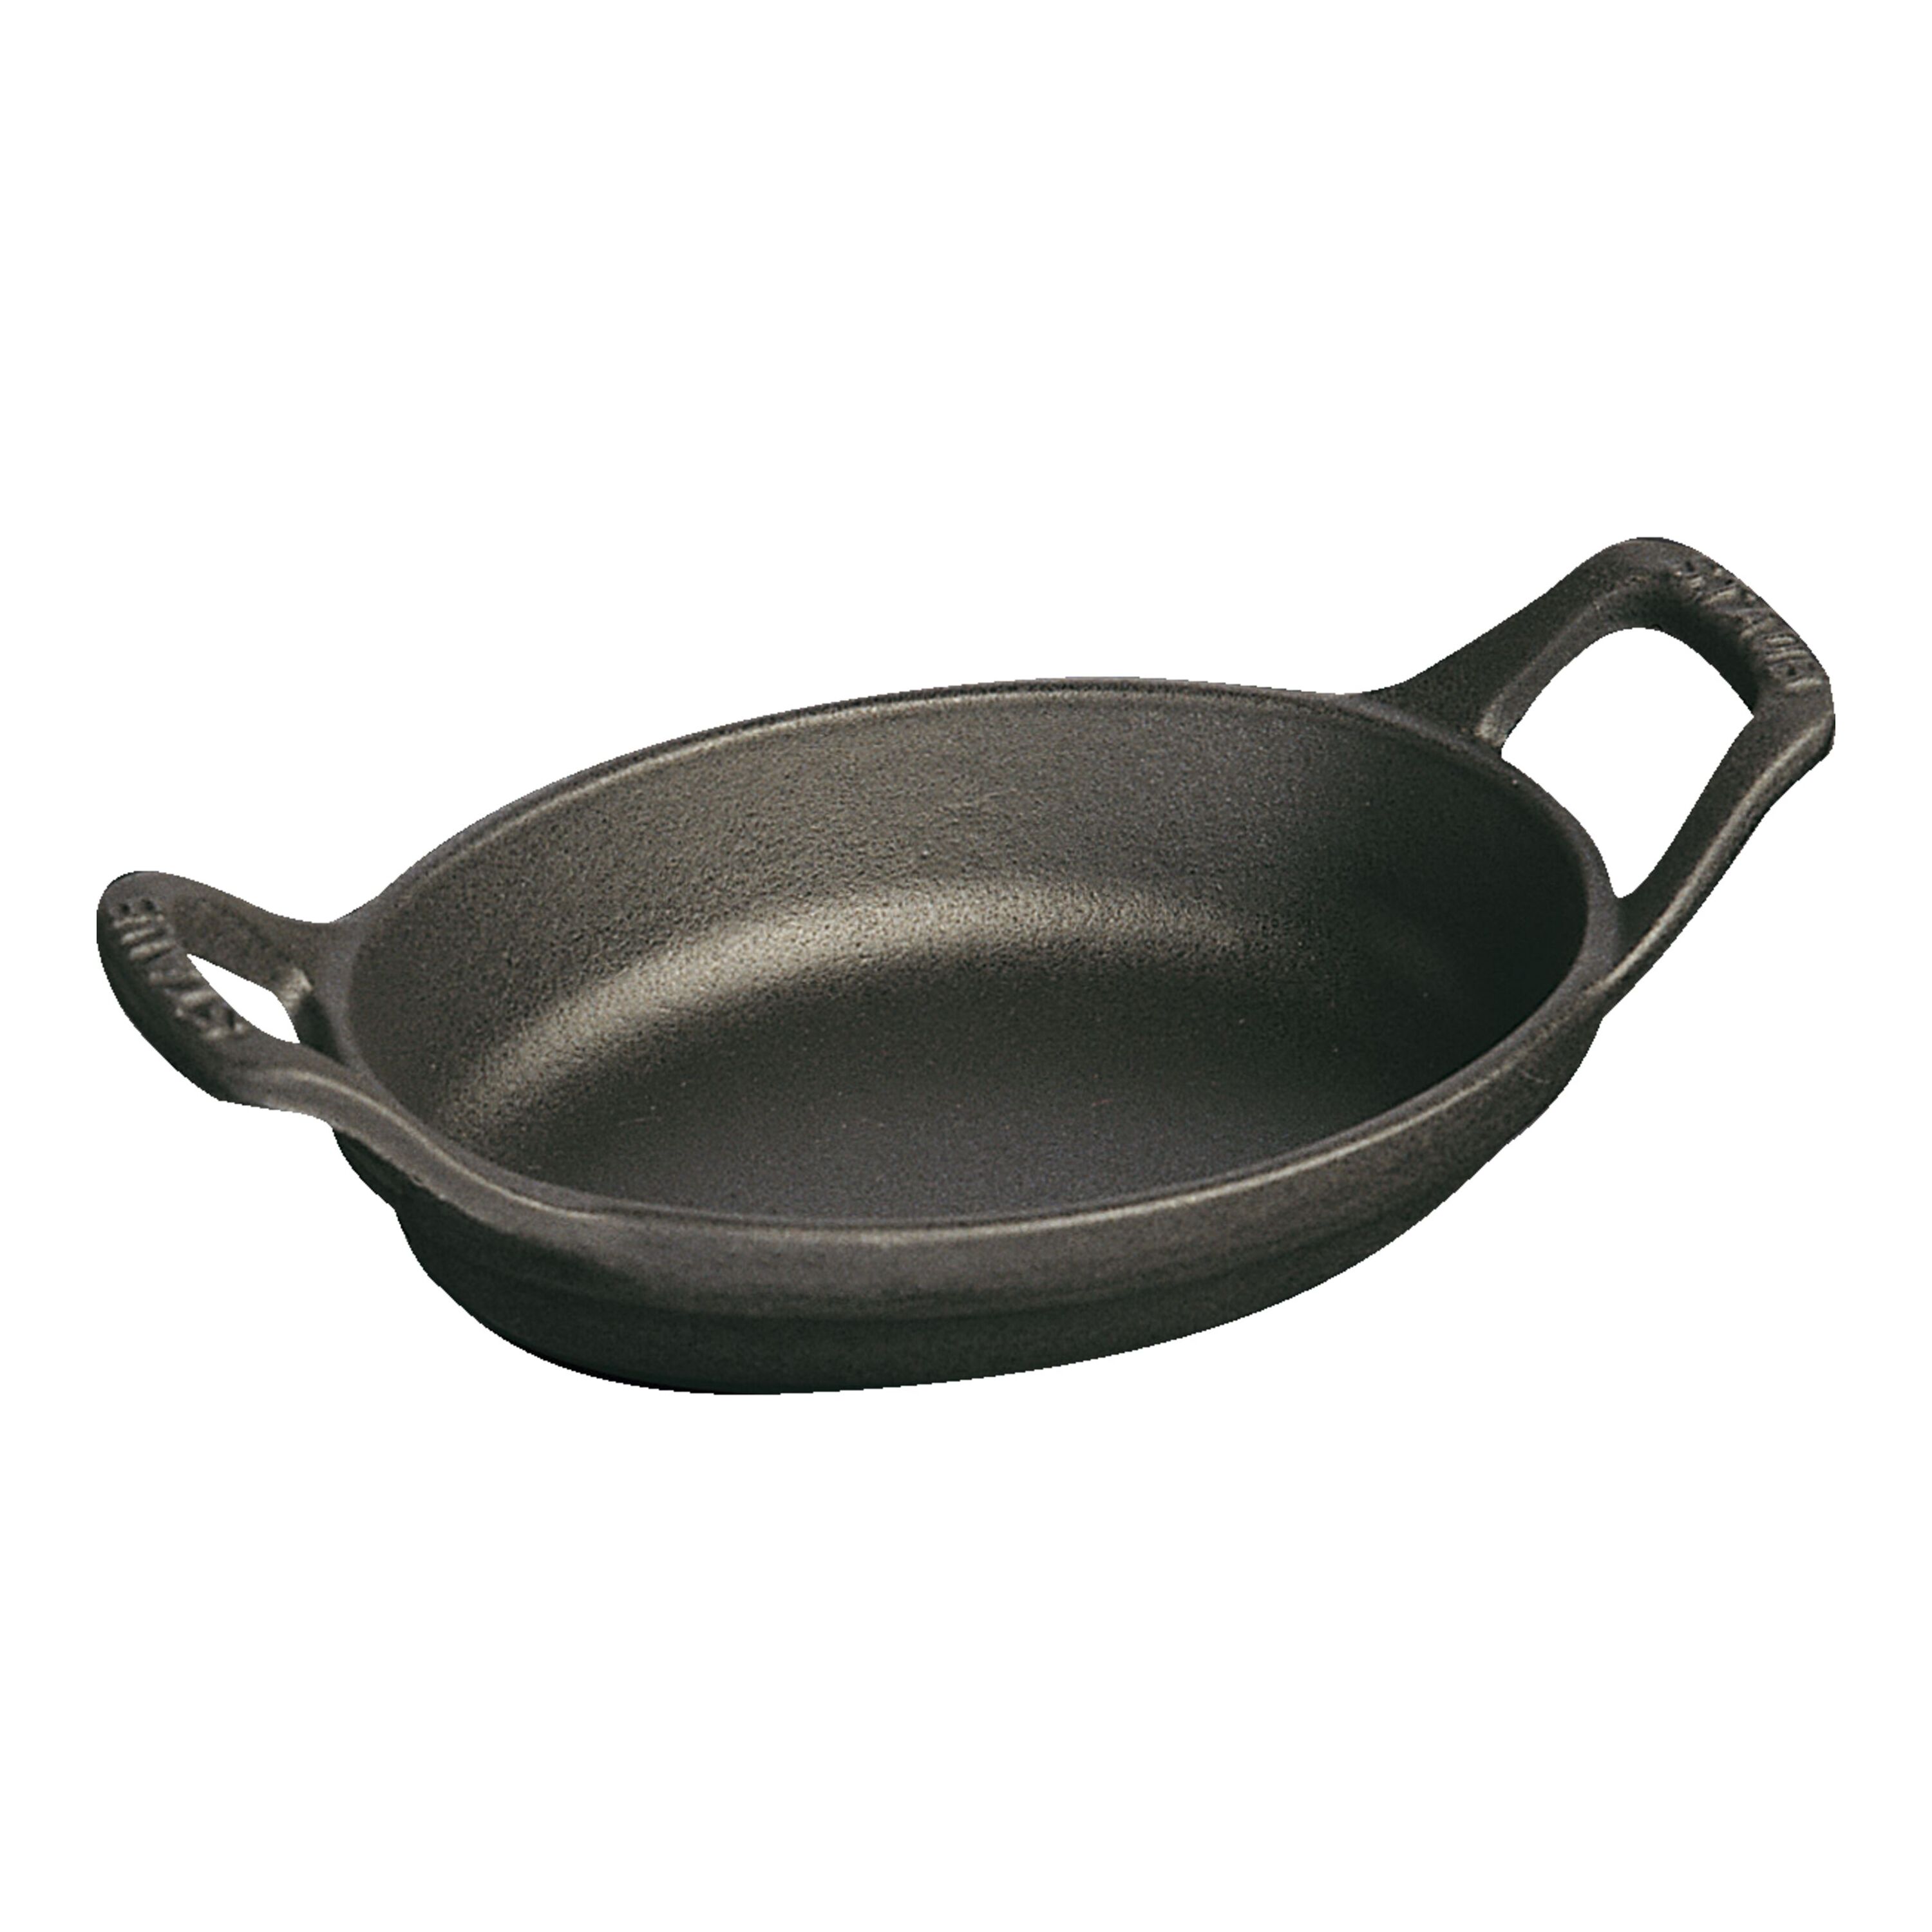 Buy Staub Cast Iron - Baking Dishes & Roasters Oven dish